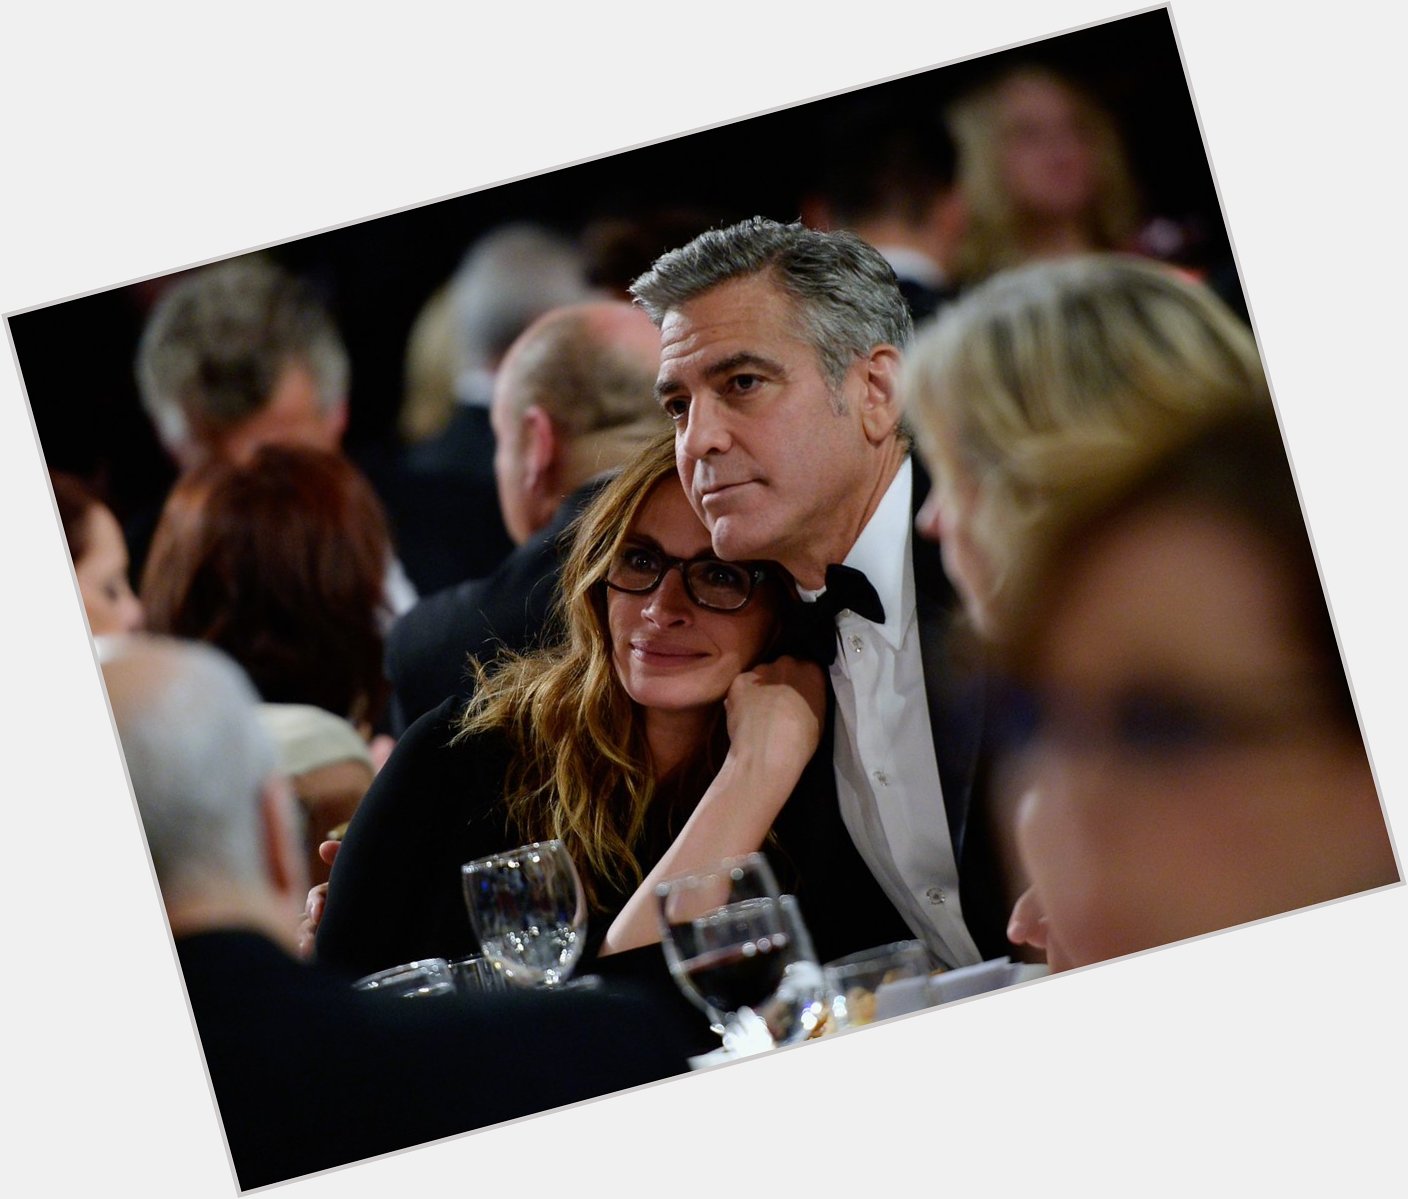 Happy Birthday to Julia Roberts! Here she is with 2013 honoree George Clooney. (PS - TWO days left!) 